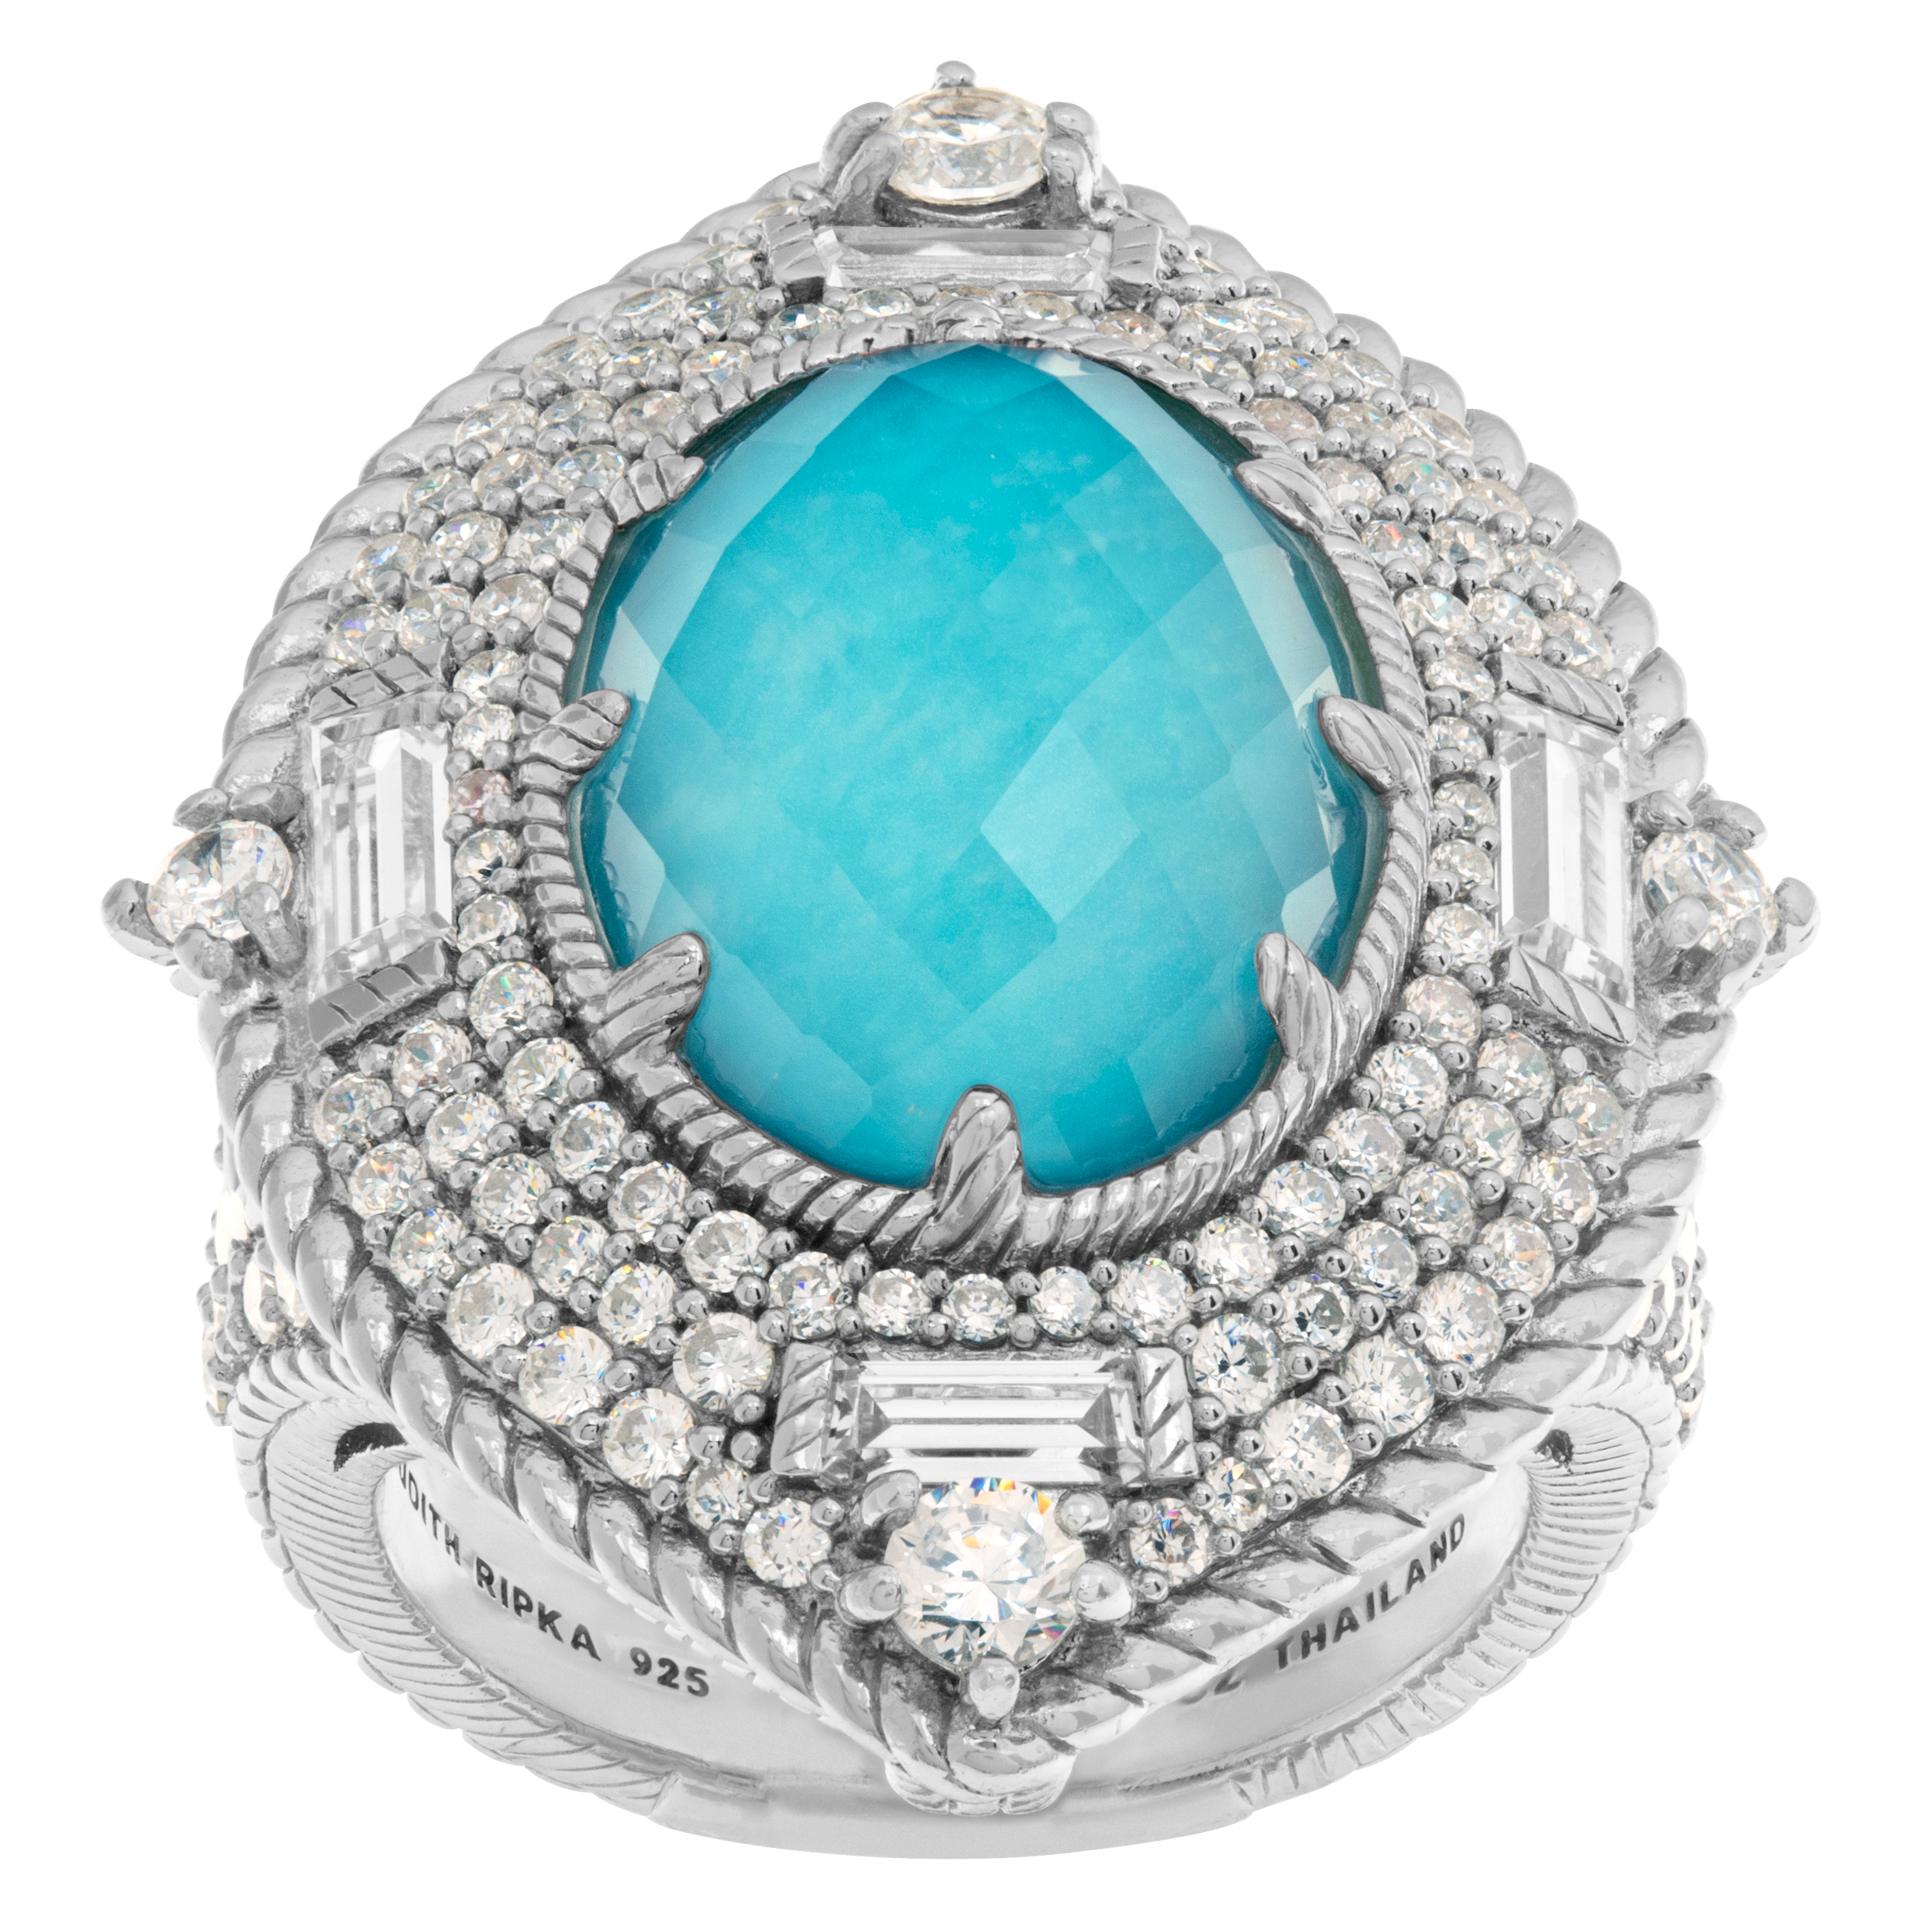 Judith Ripka ring with faceted blue topaz and cz white stones in sterling silver image 1